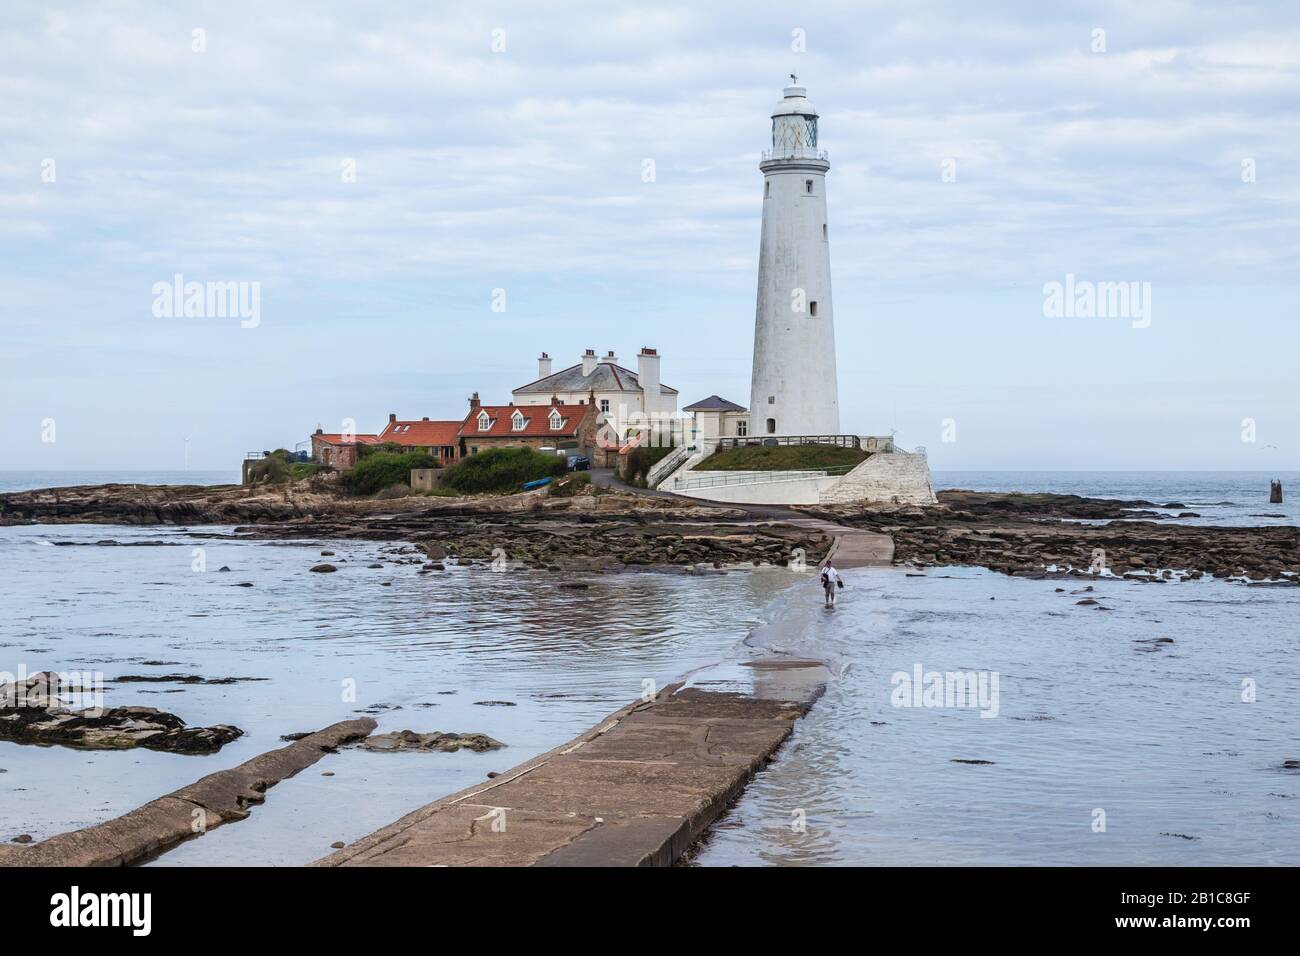 Man wading through the water as the tide comes in at St Mary's Lighthouse, Whitley Bay, North East England. The causeway is underwater at high tide. Stock Photo